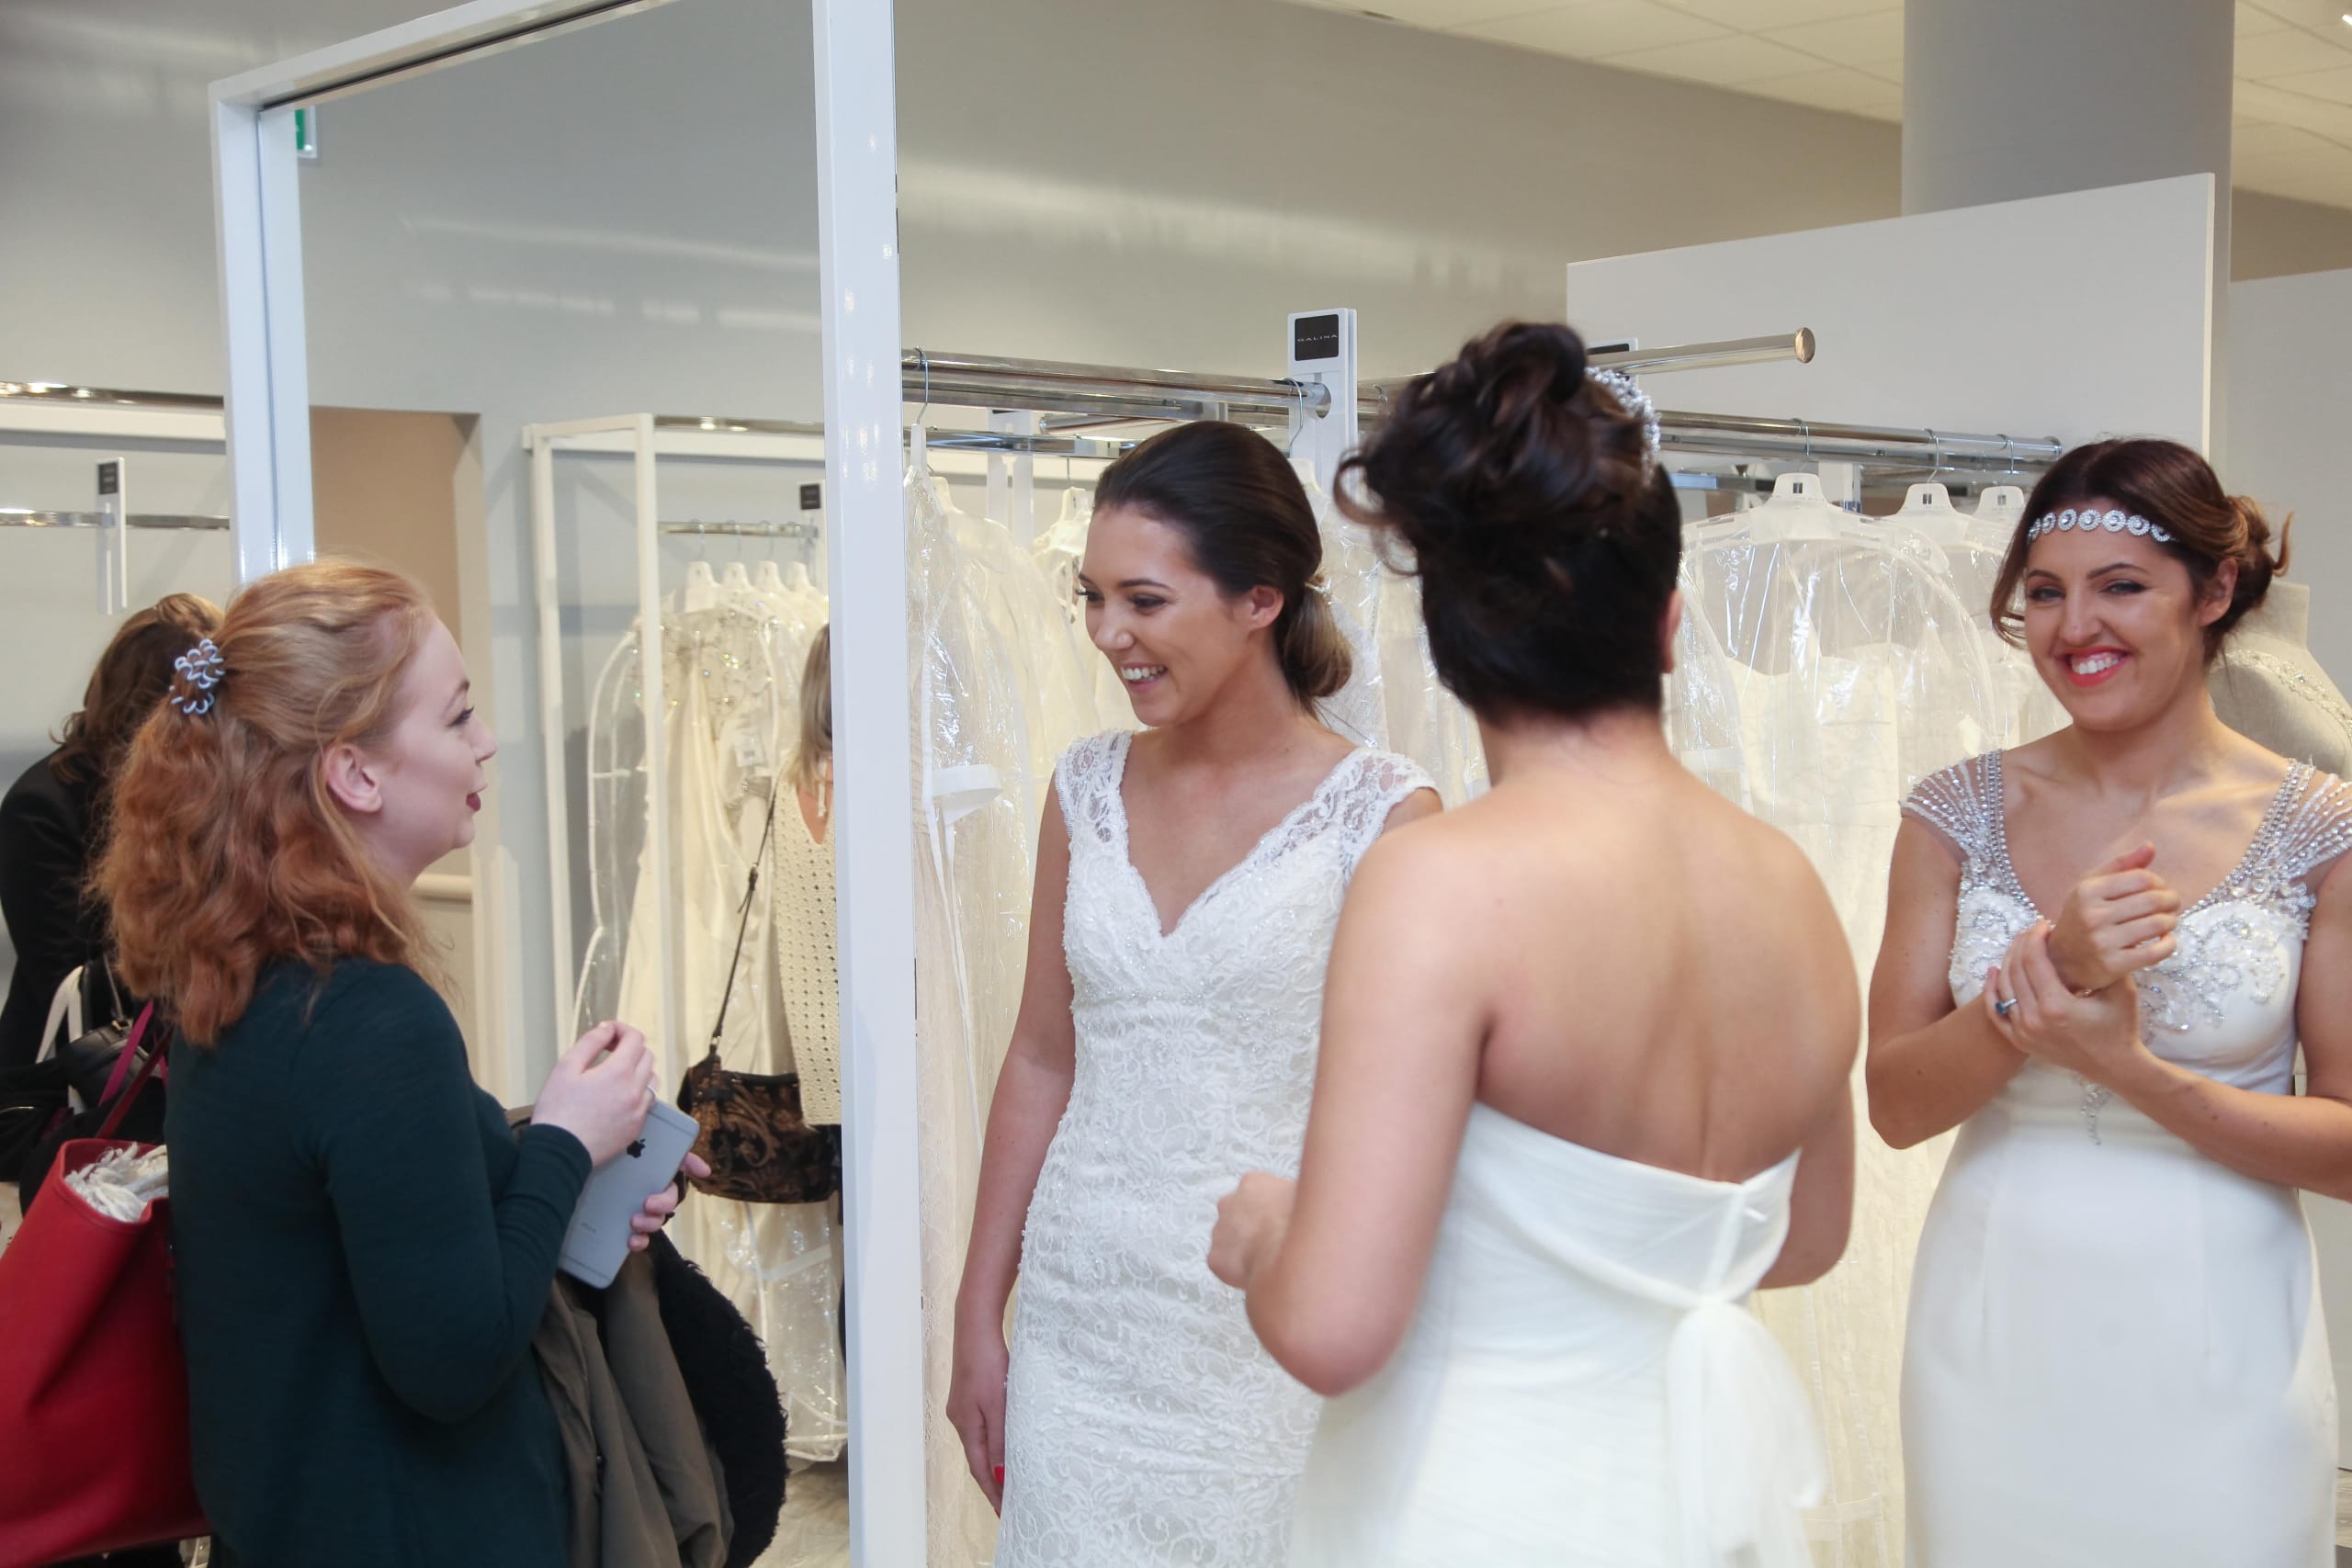 Bridebook.co.uk brides to be trying on dresses